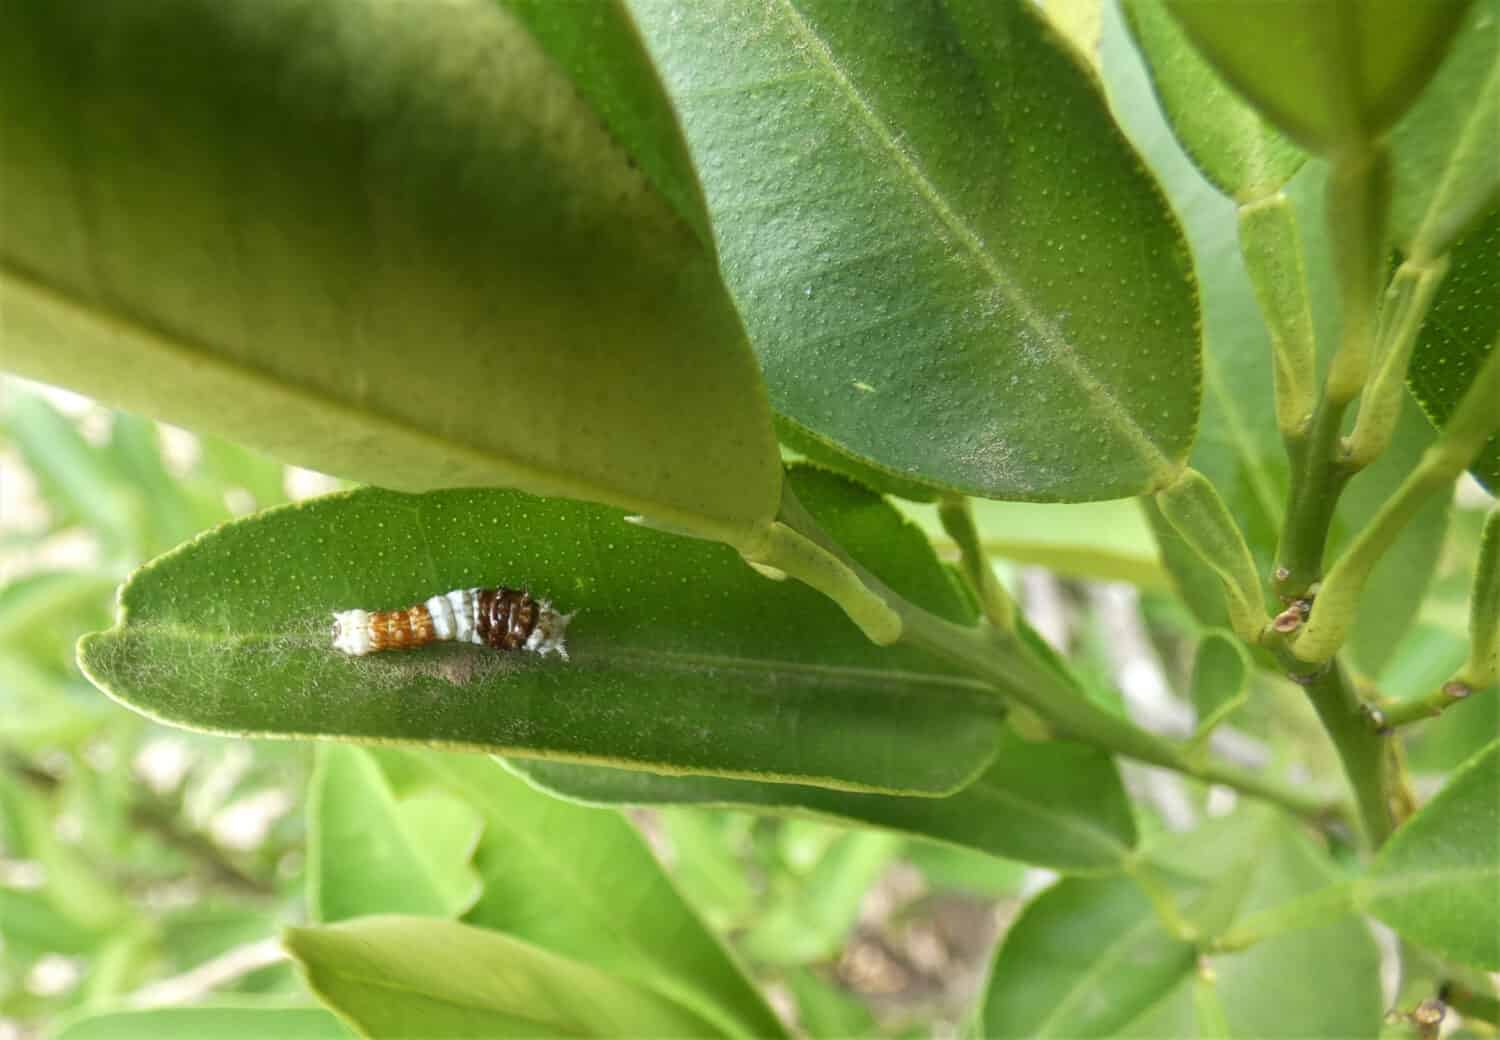 A young Australian citrus swallowtail caterpillar on a citrus leaf, against green, leafy background